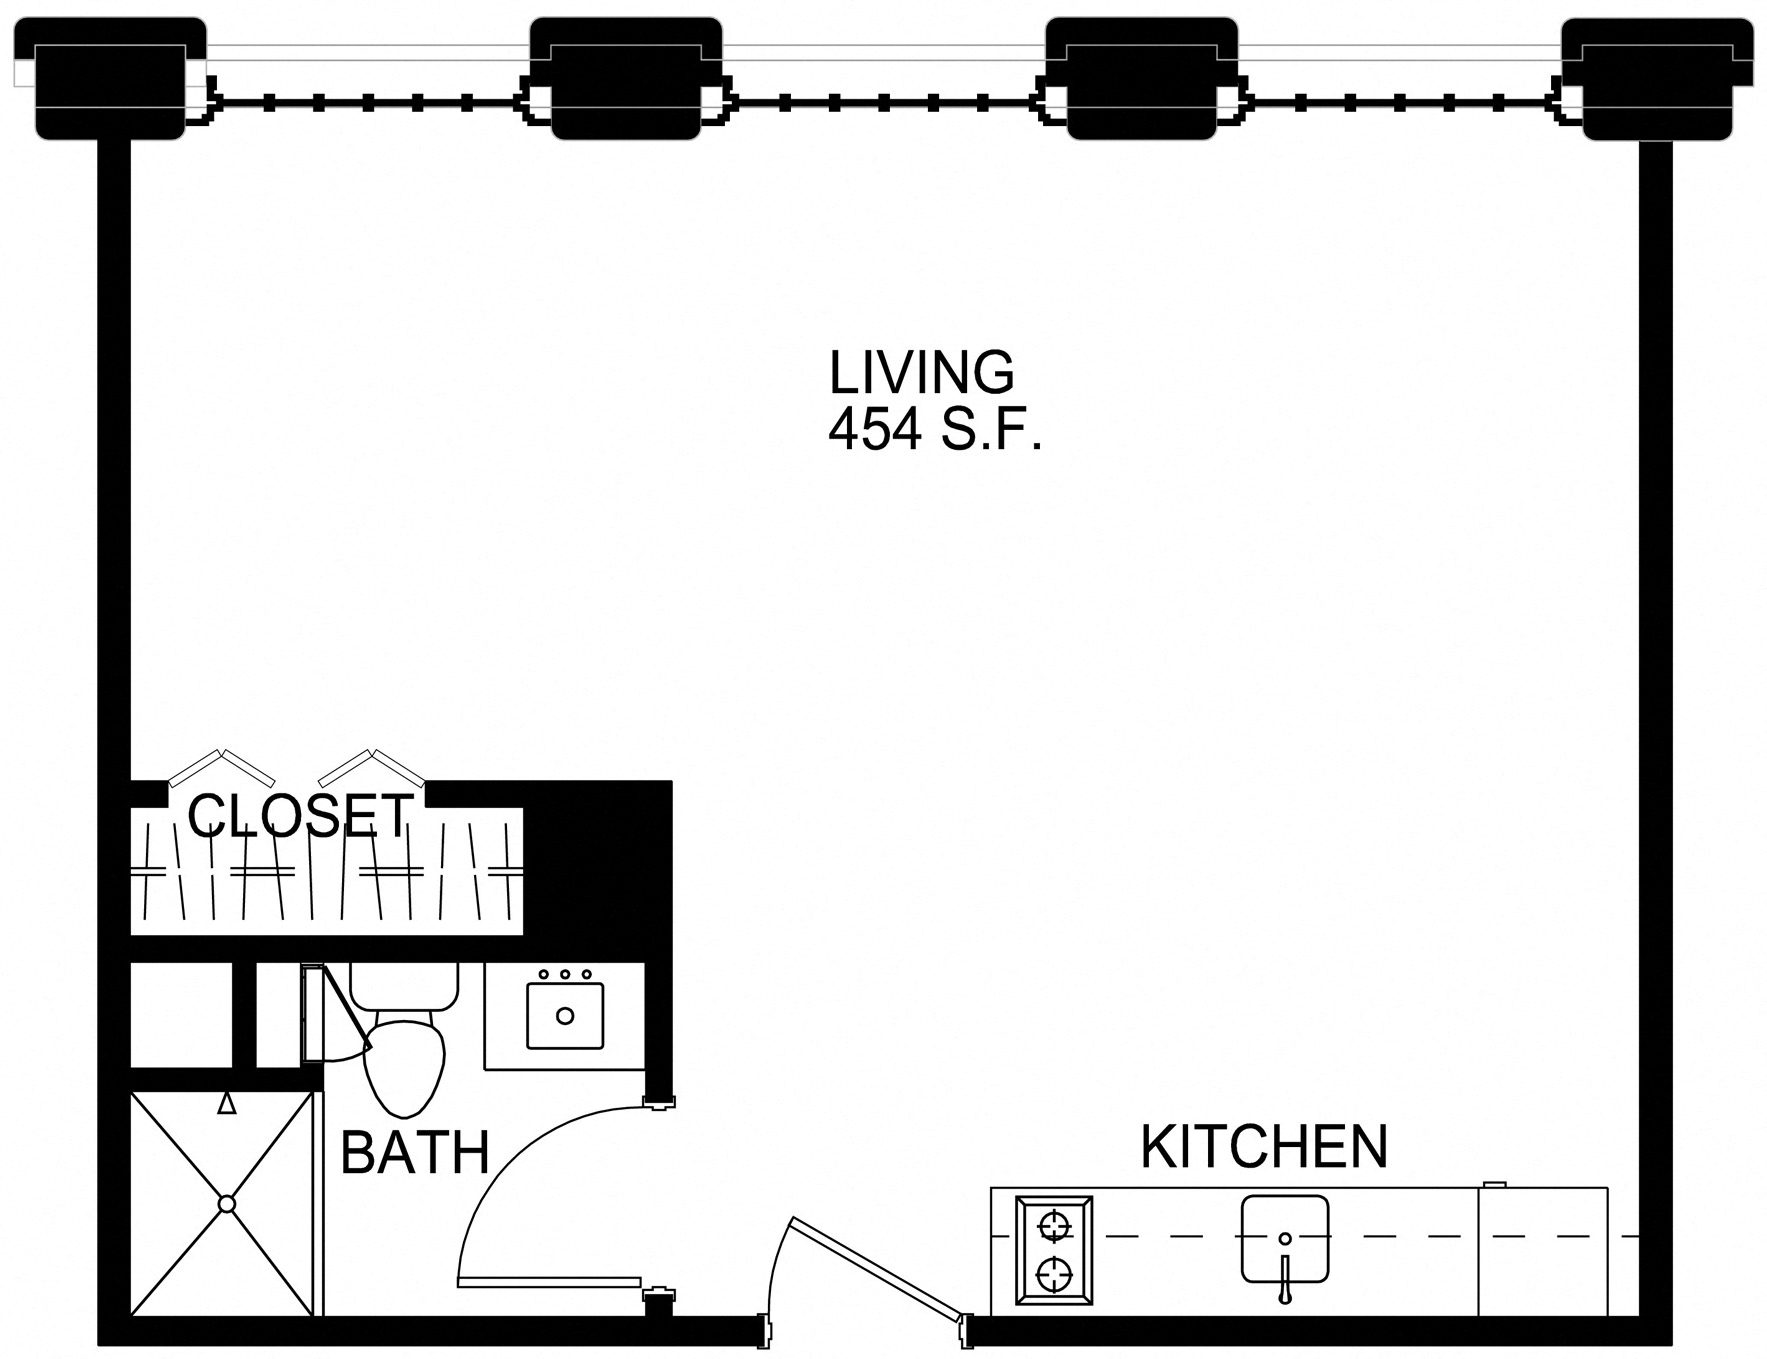 Floorplan for Apartment #S2210, 0 bedroom unit at Halstead Providence